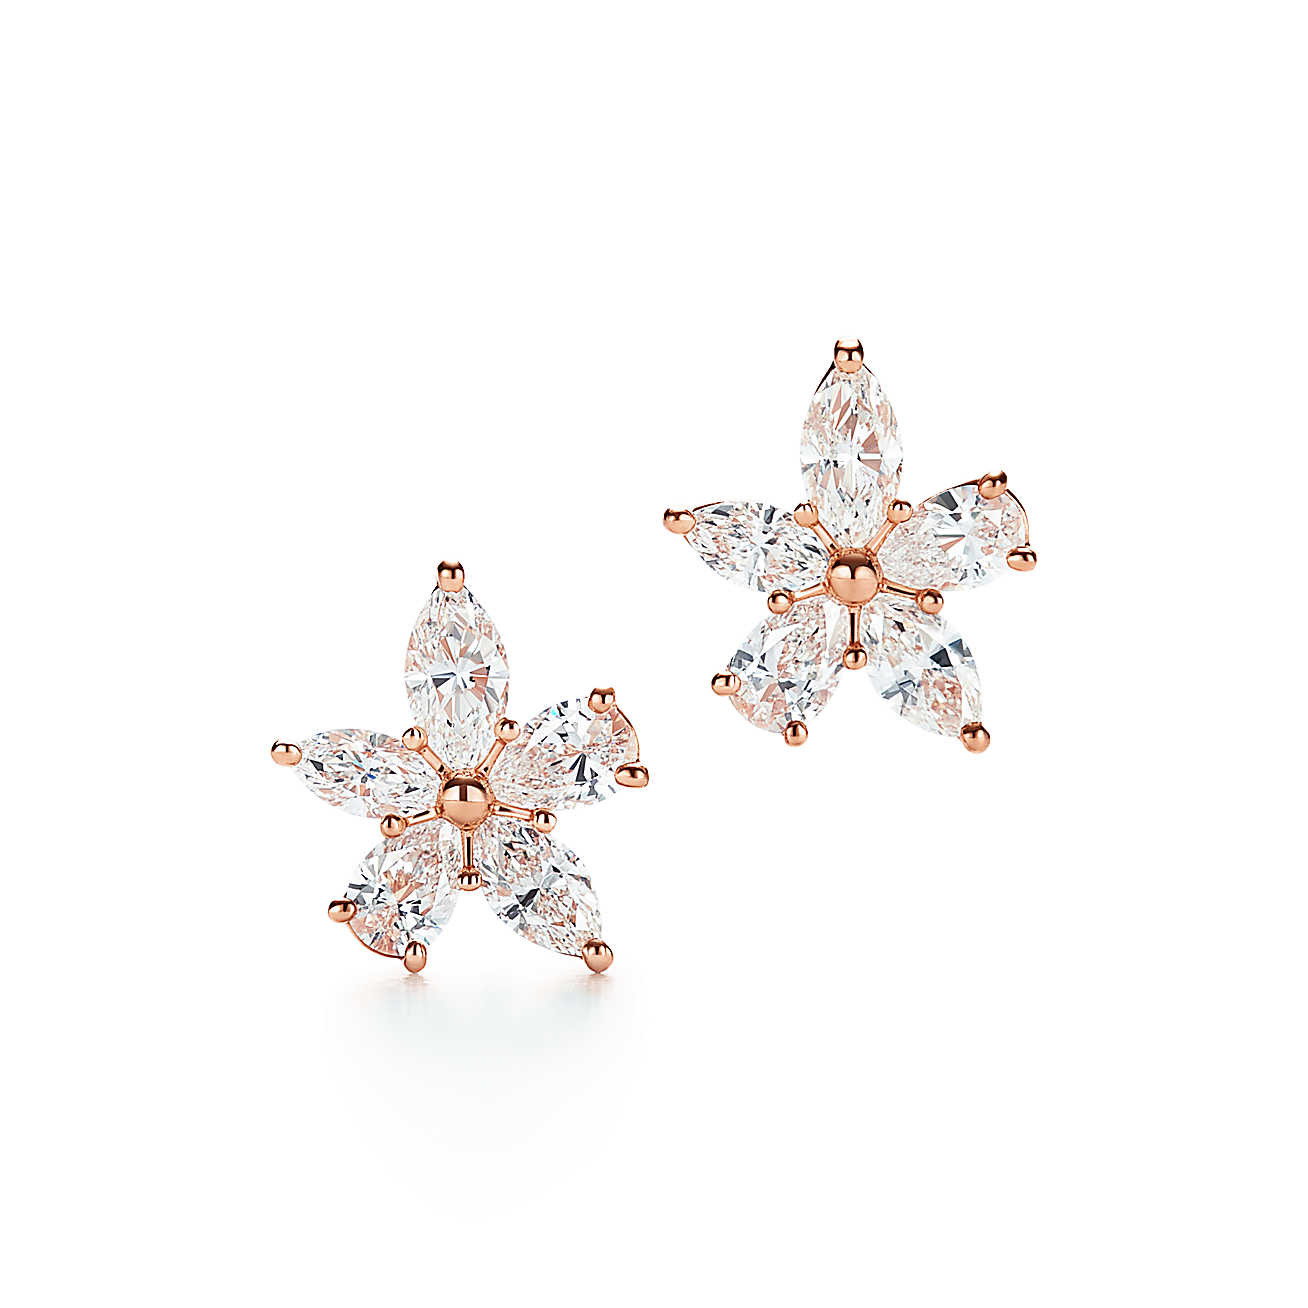 Tiffany Victoria Earrings
 Tiffany Victoria mixed cluster earrings in rose gold with